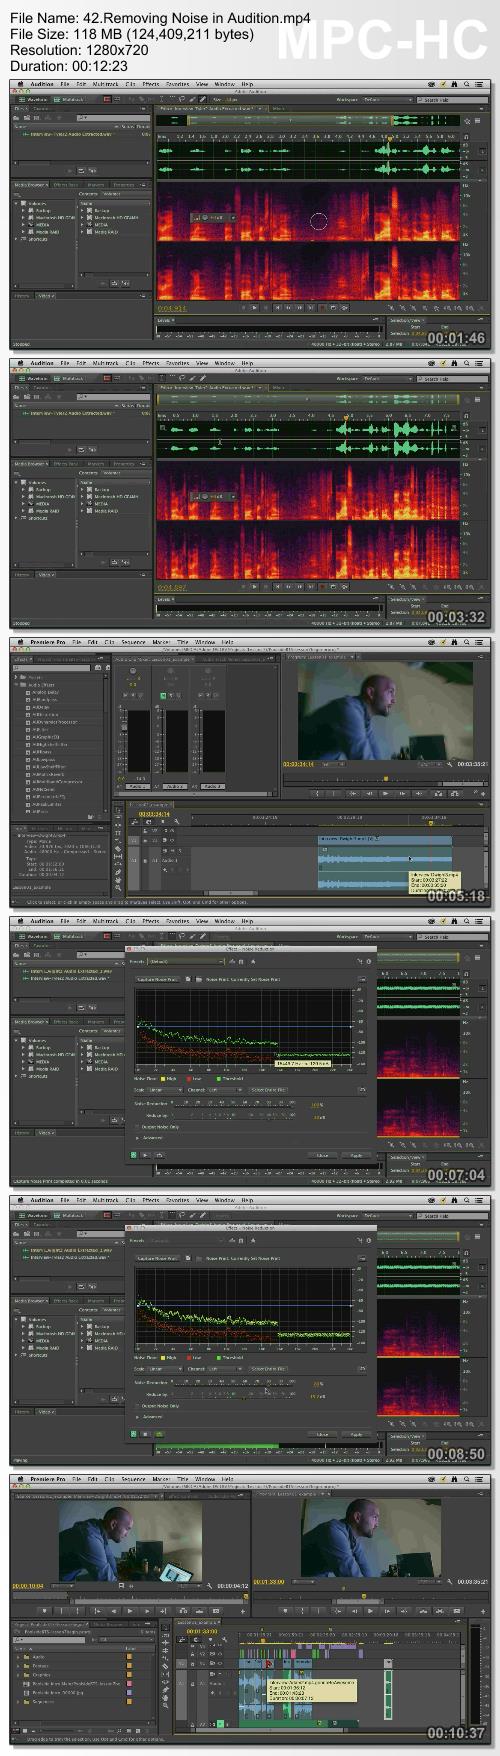 Filmmaking with Adobe Digital Video Tools and Workflows